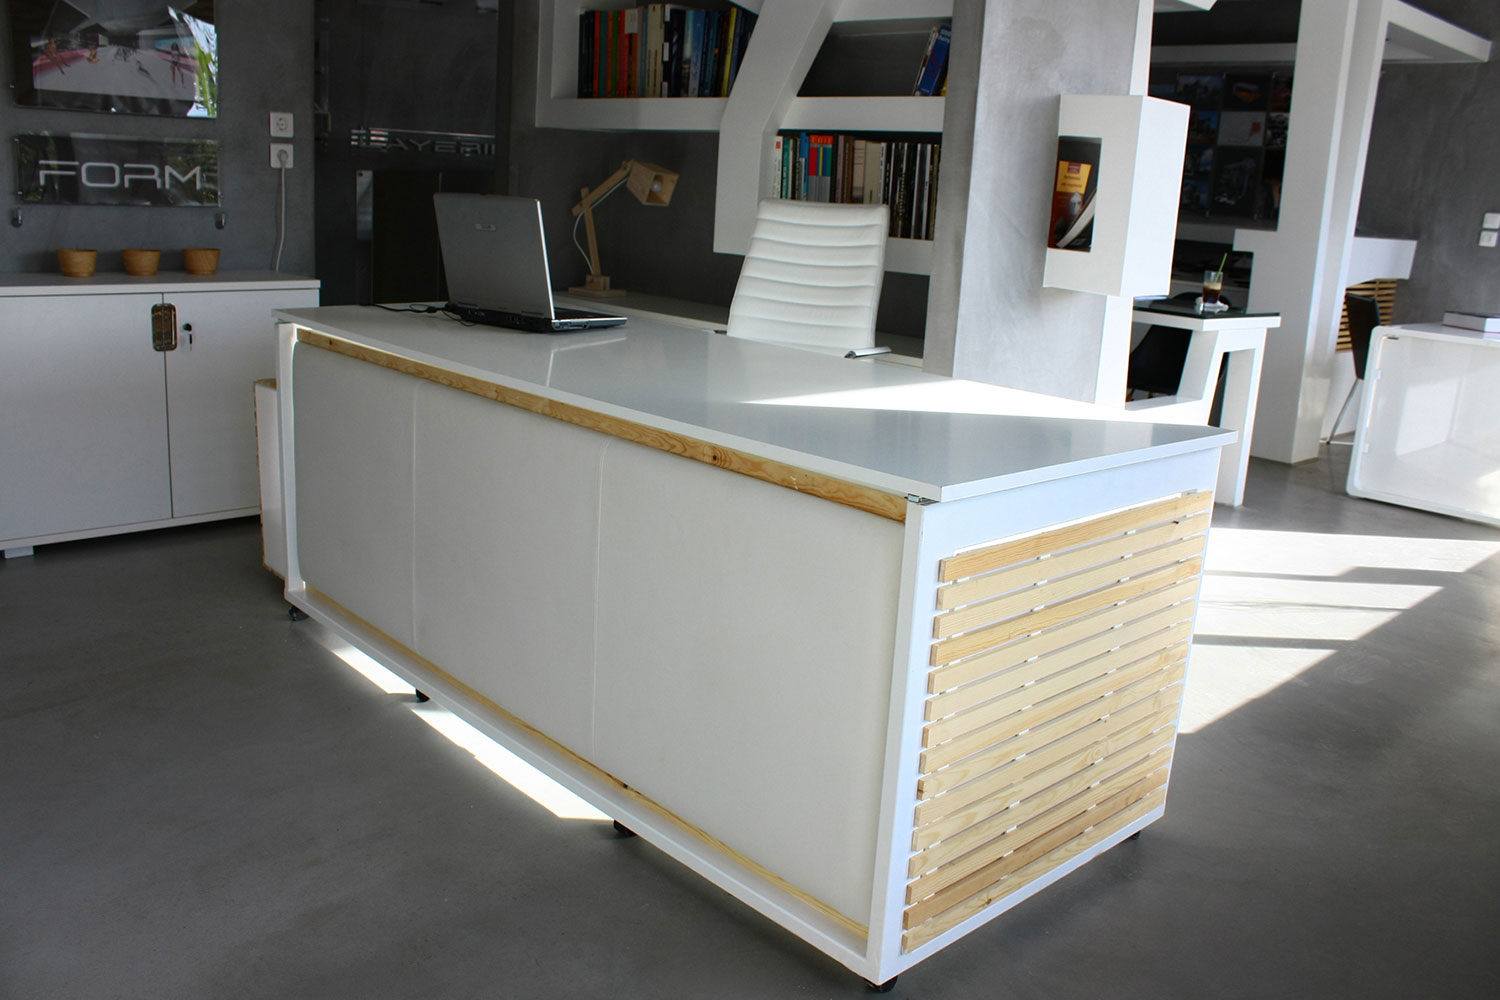 this bed desk would make it easy to nap at work 1  6 s m of life 004